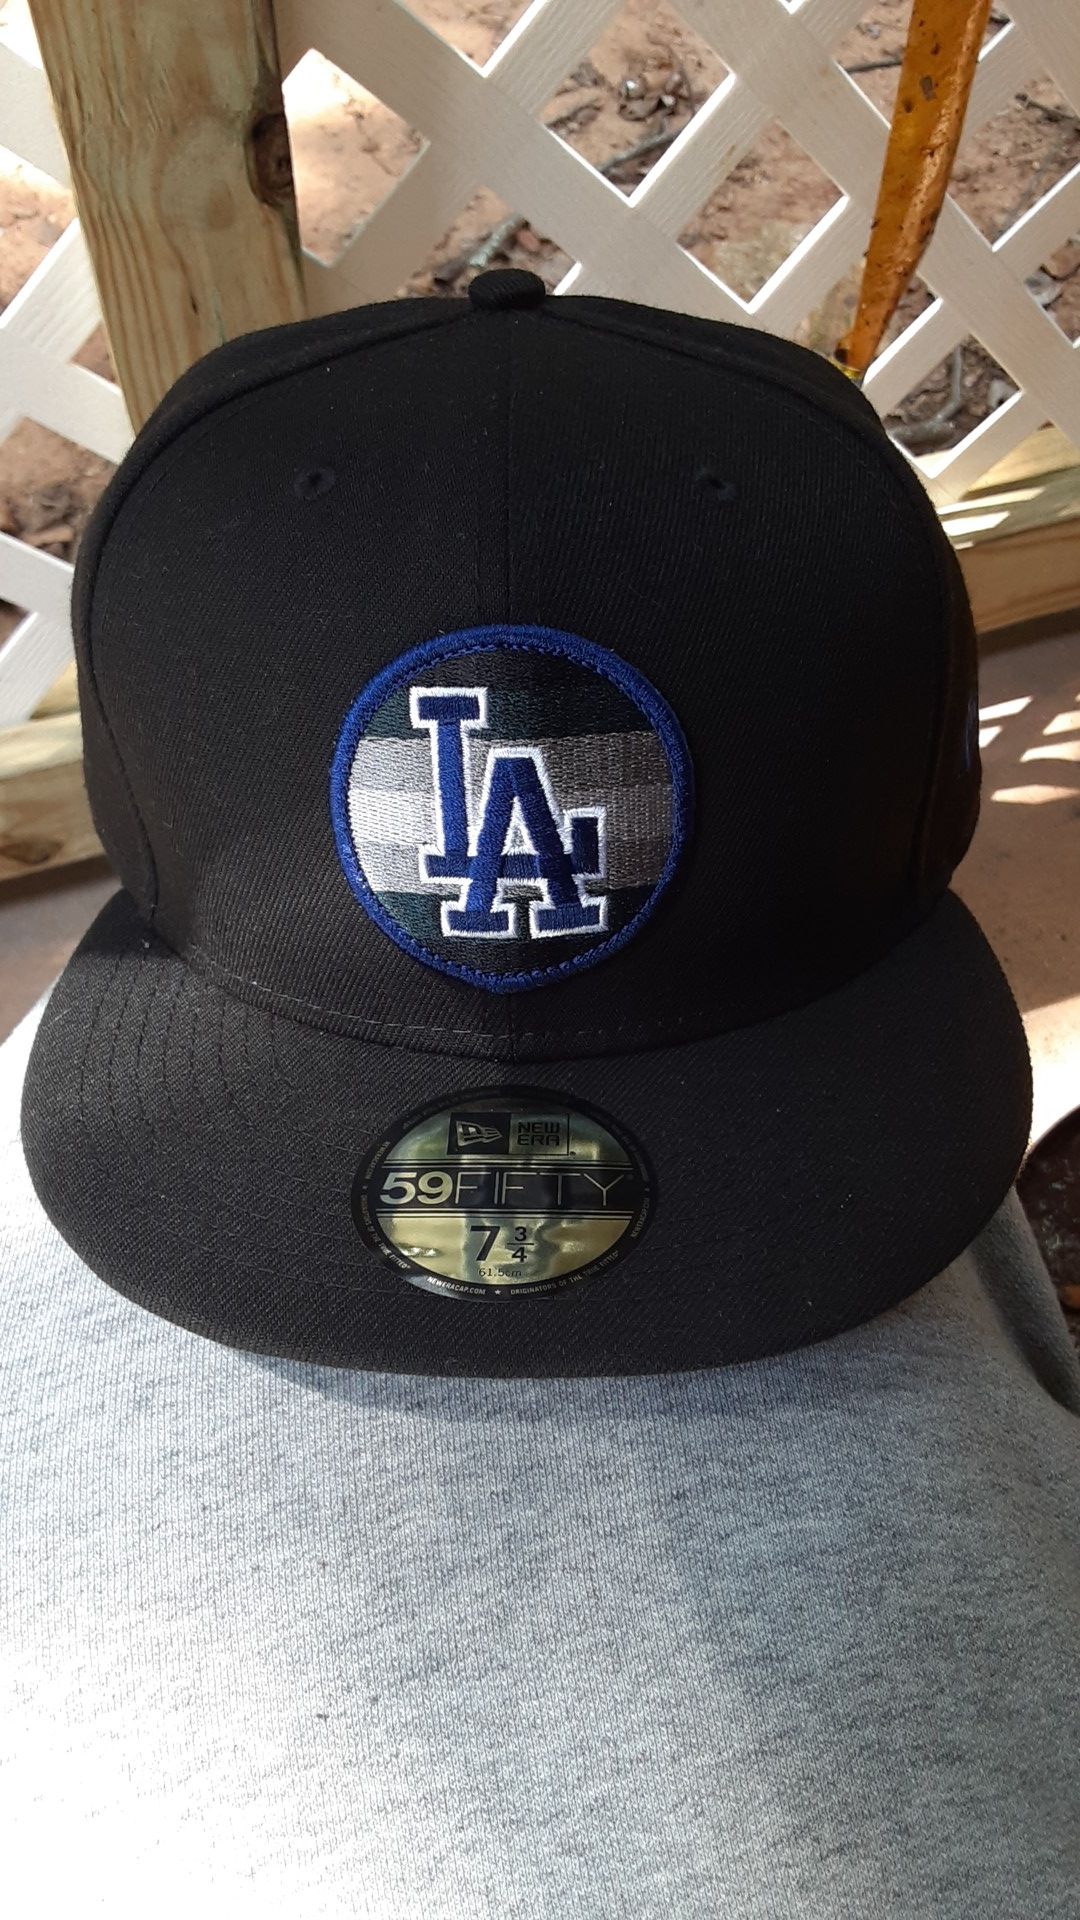 LA fitted hat